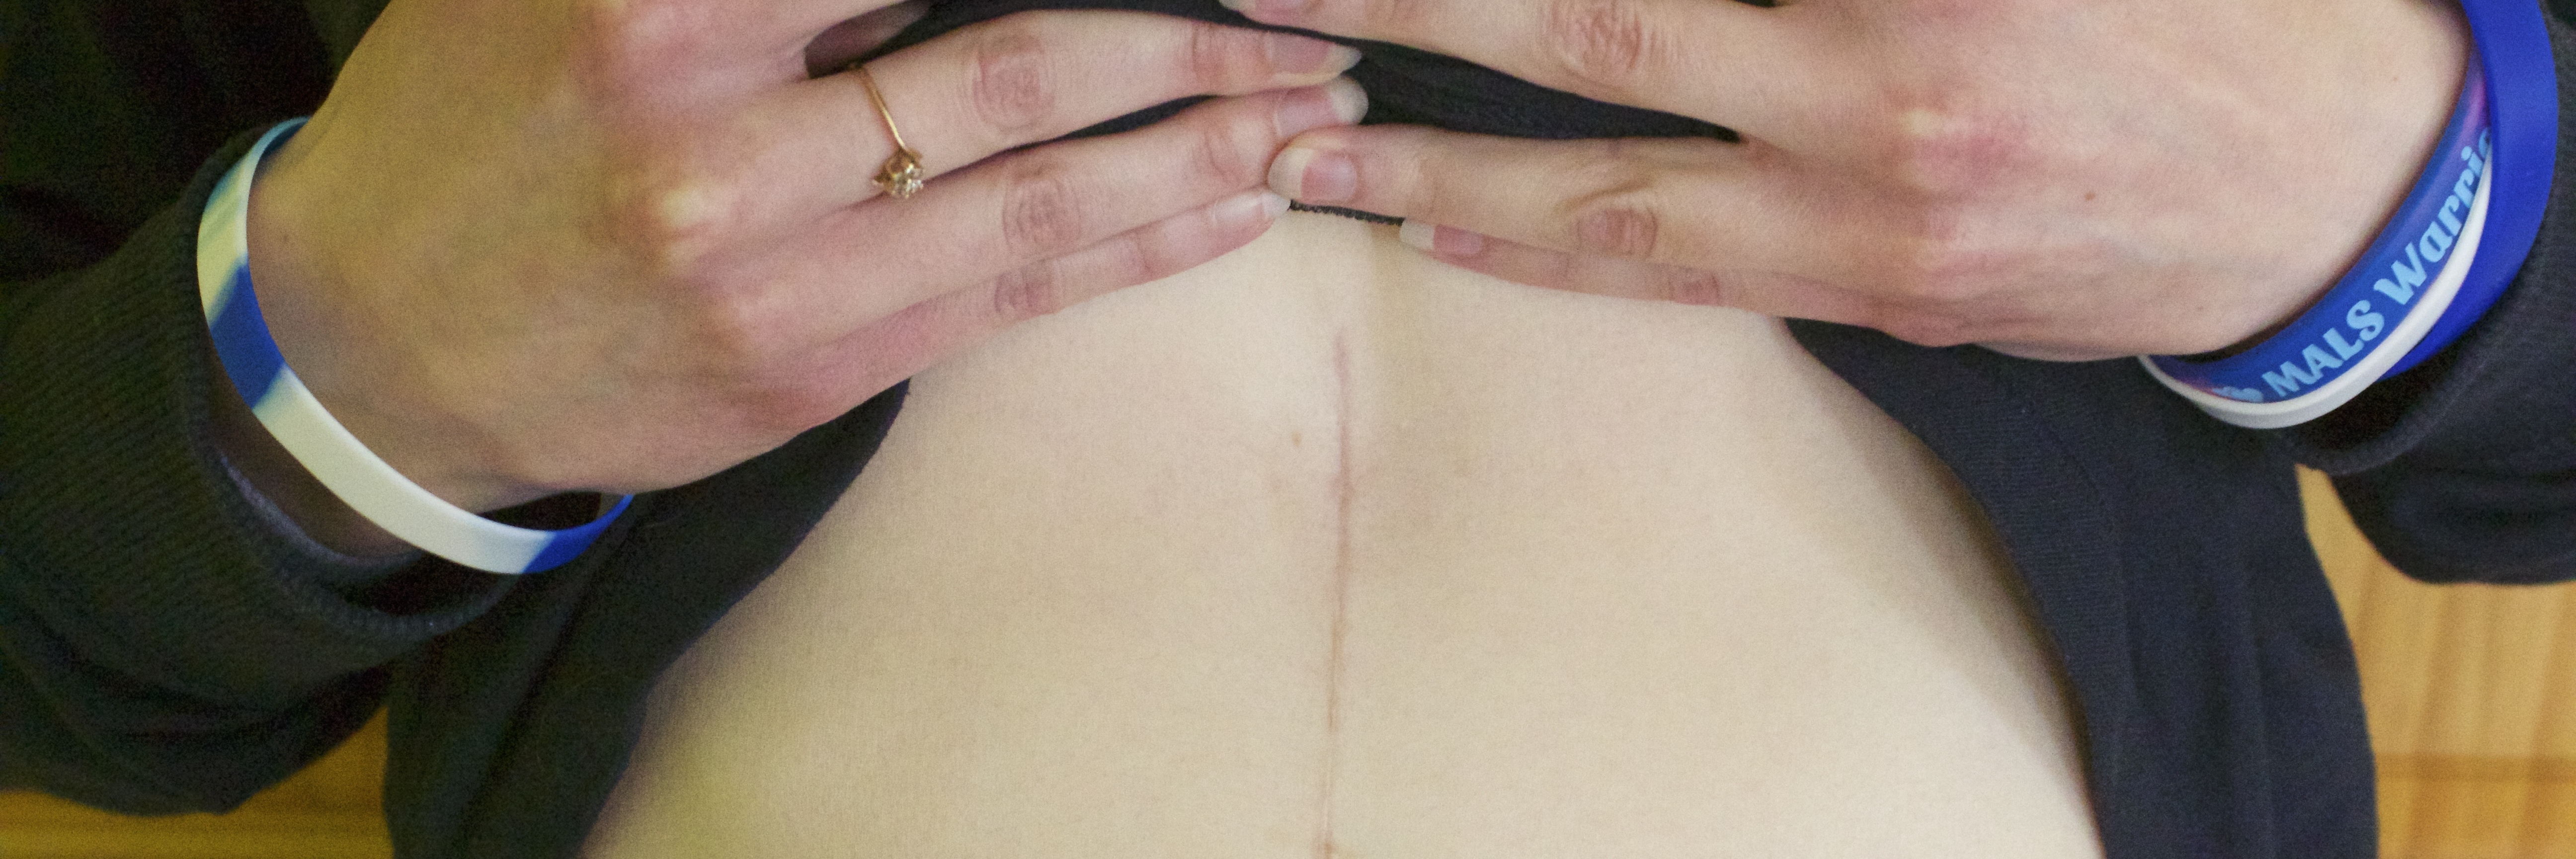 woman holding up shirt to show scar on stomach